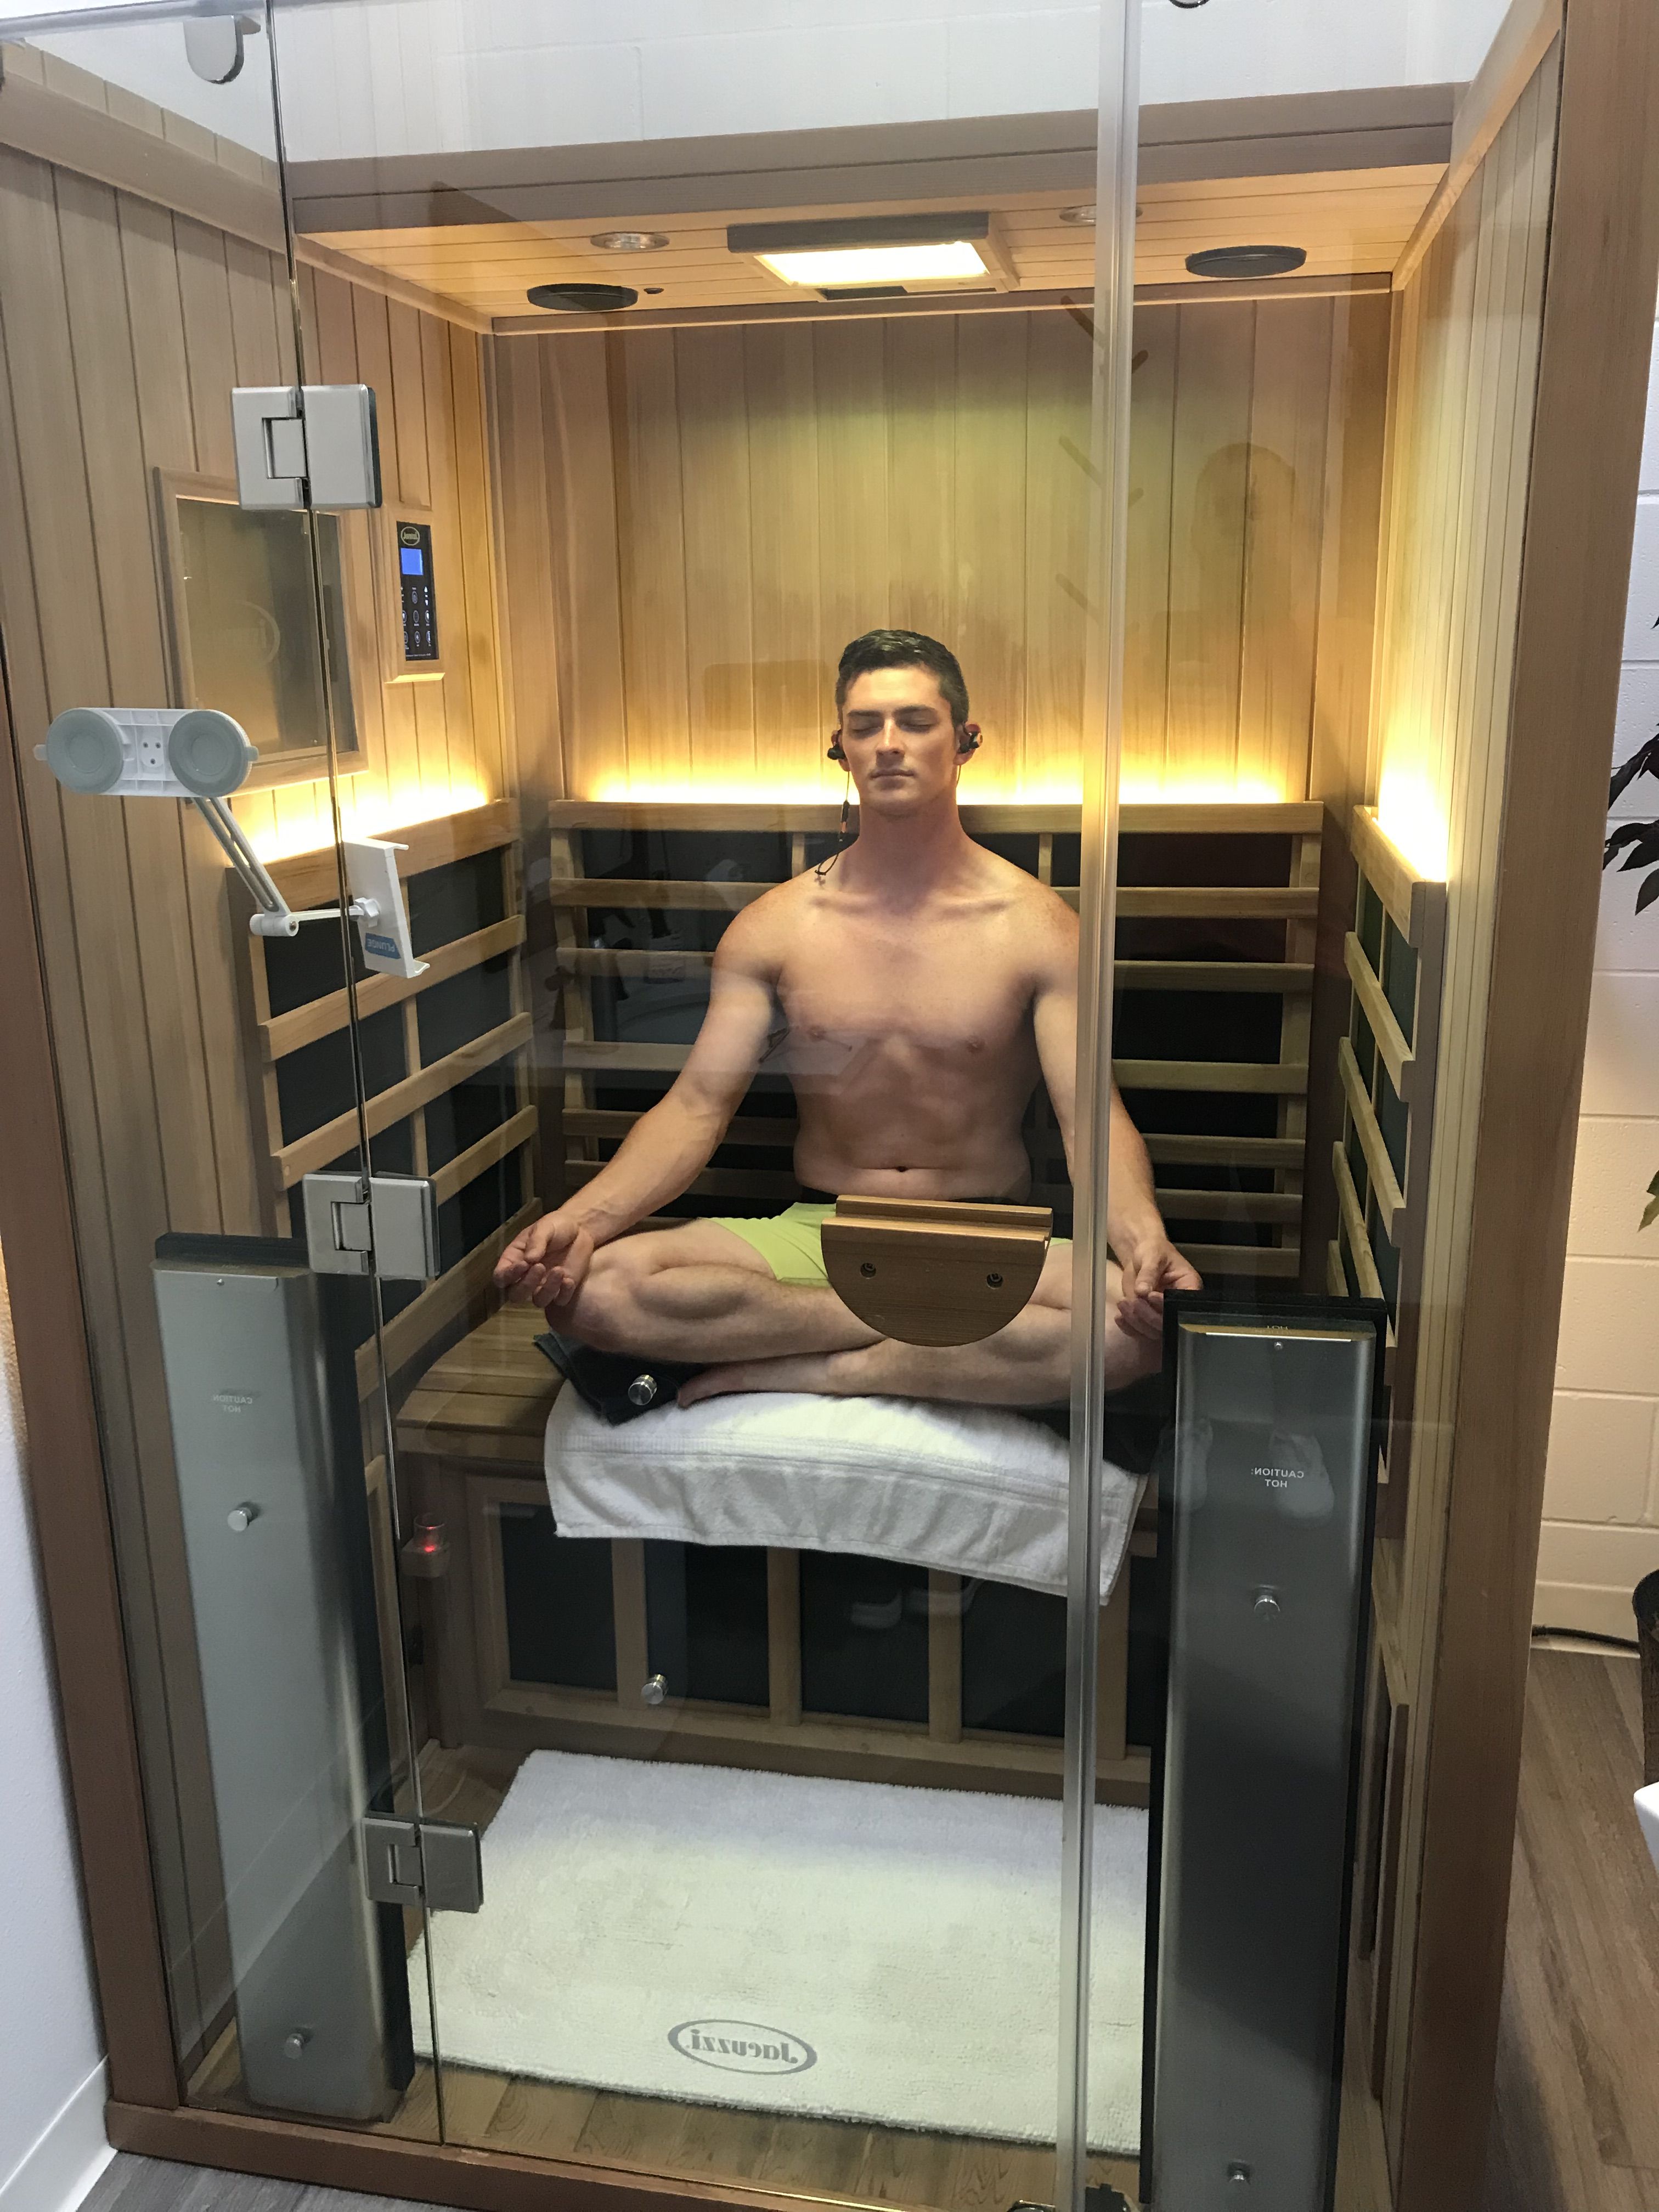 Infra Red Sauna for Health